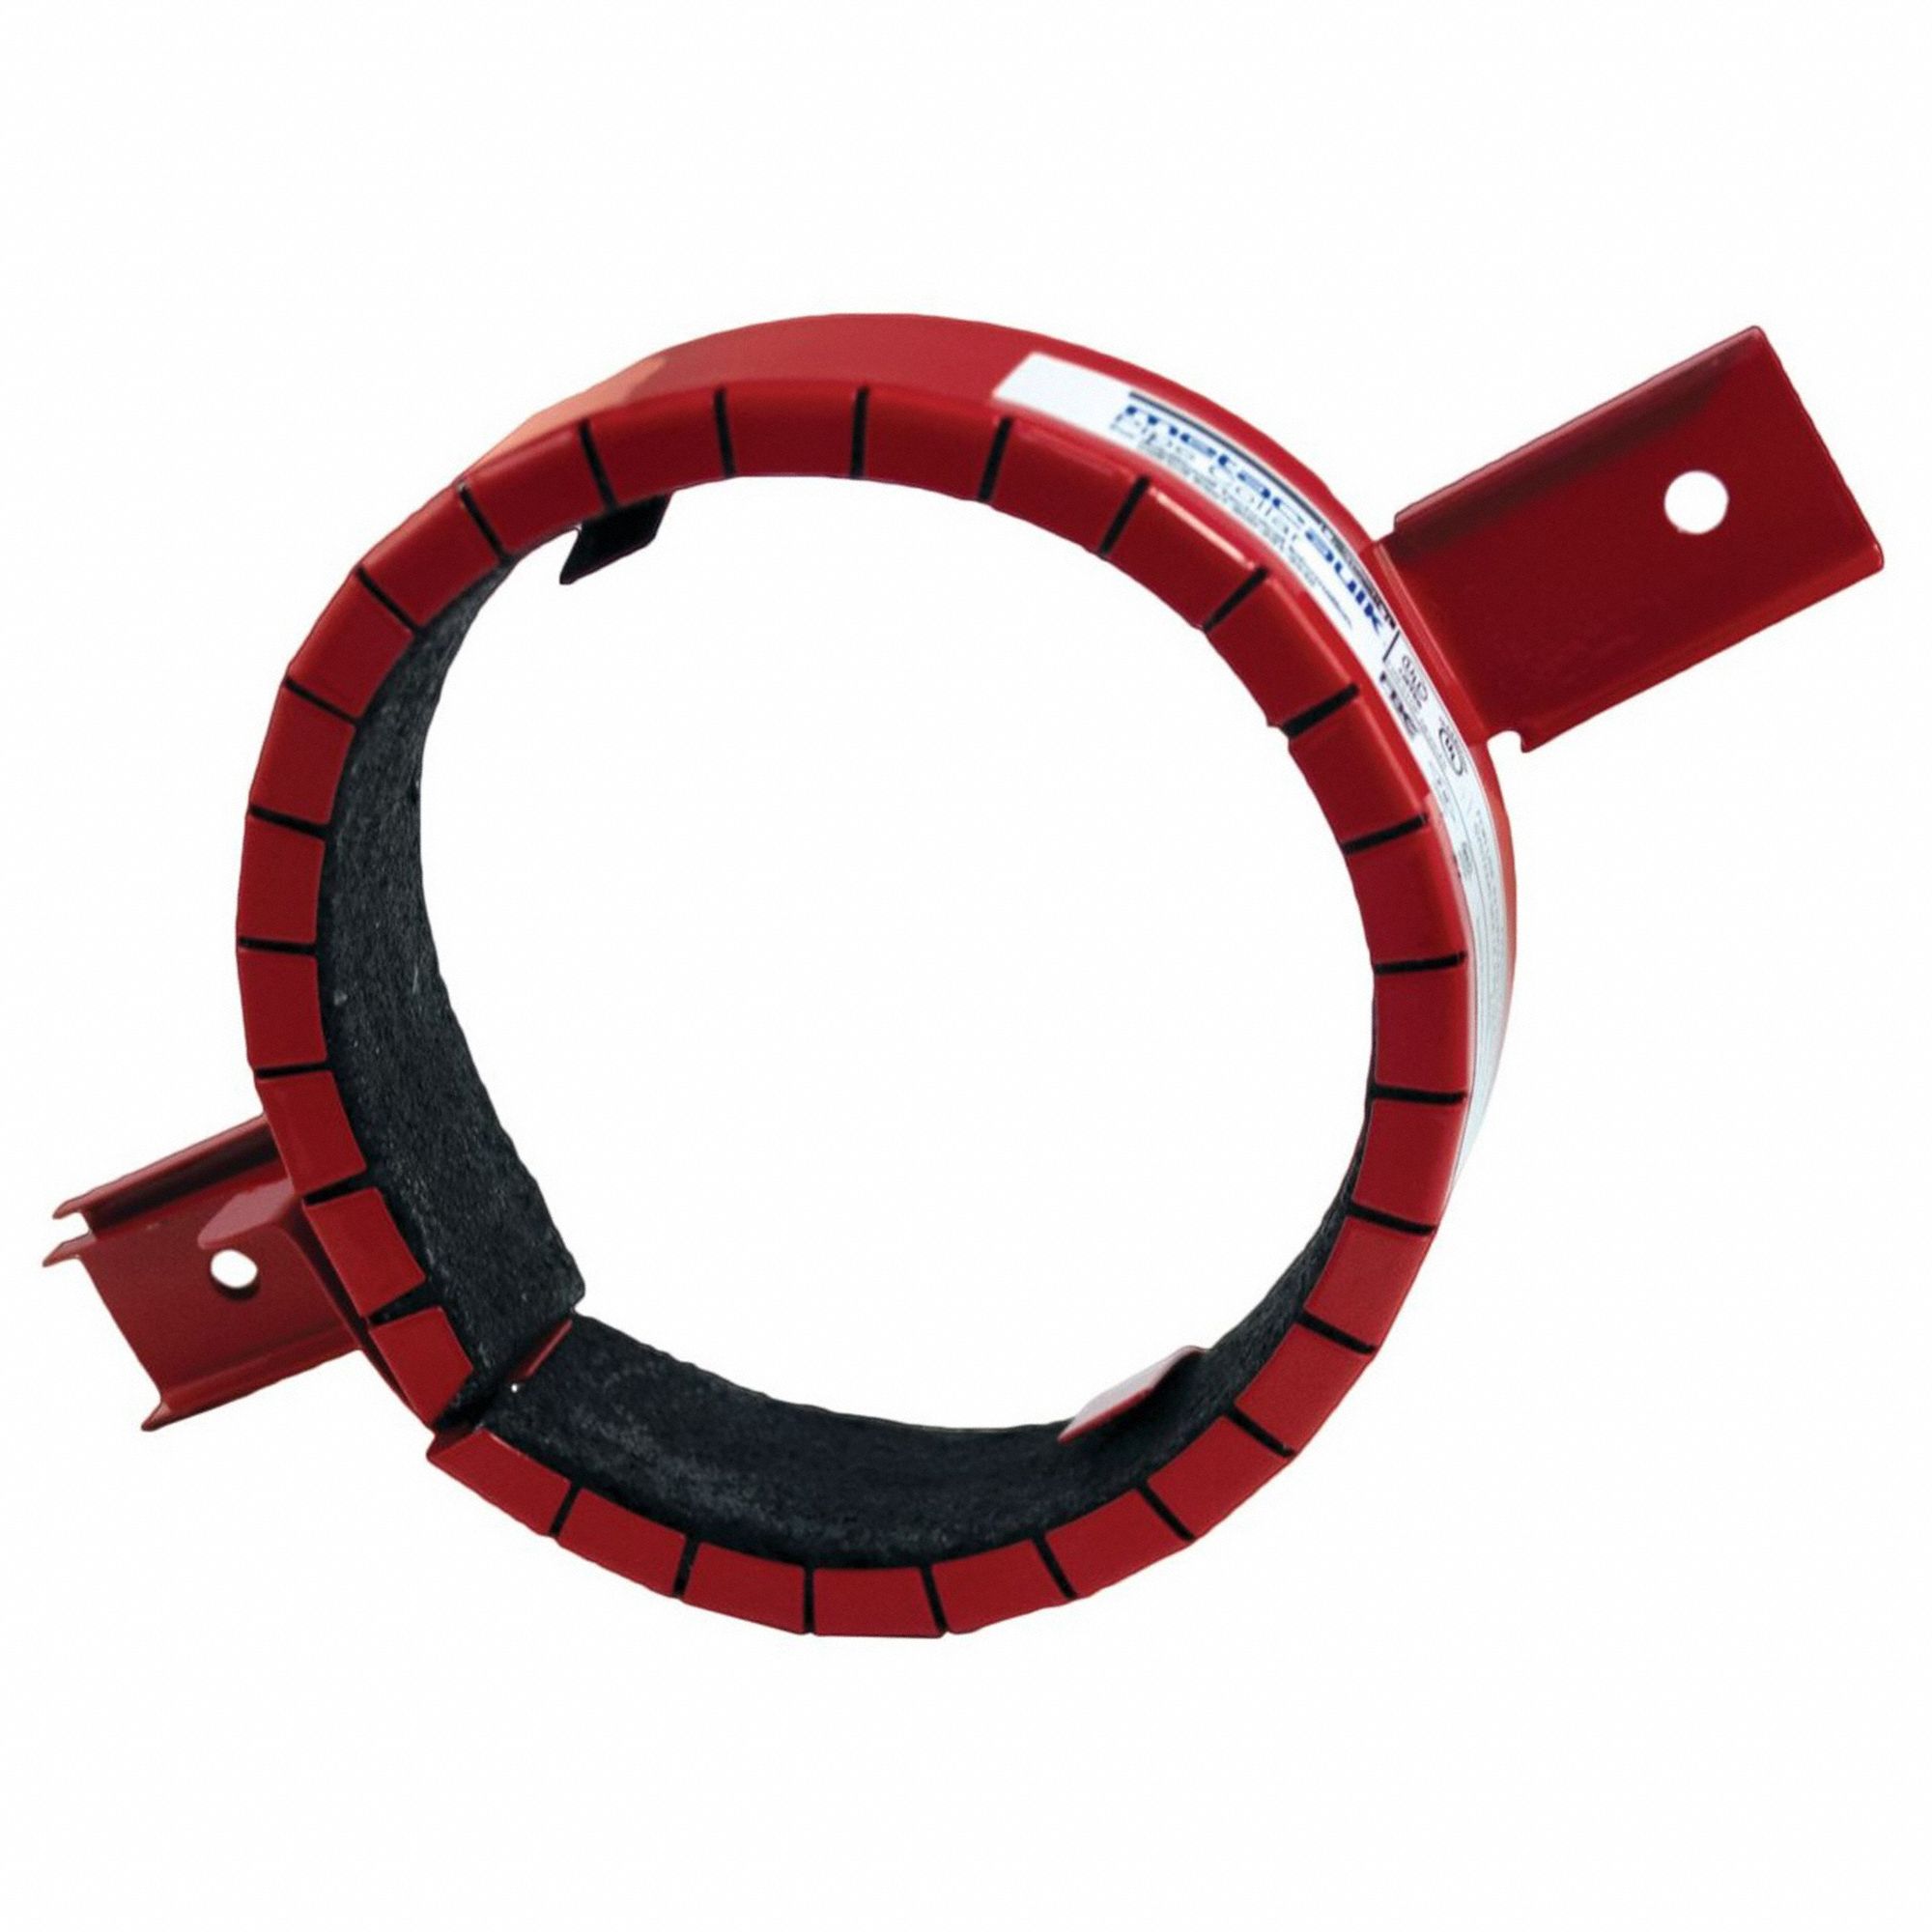 Firestop Pipe Collar: 3 in For Pipe Size, Plastic Pipe, Up to 3 hr, 9 in Ht